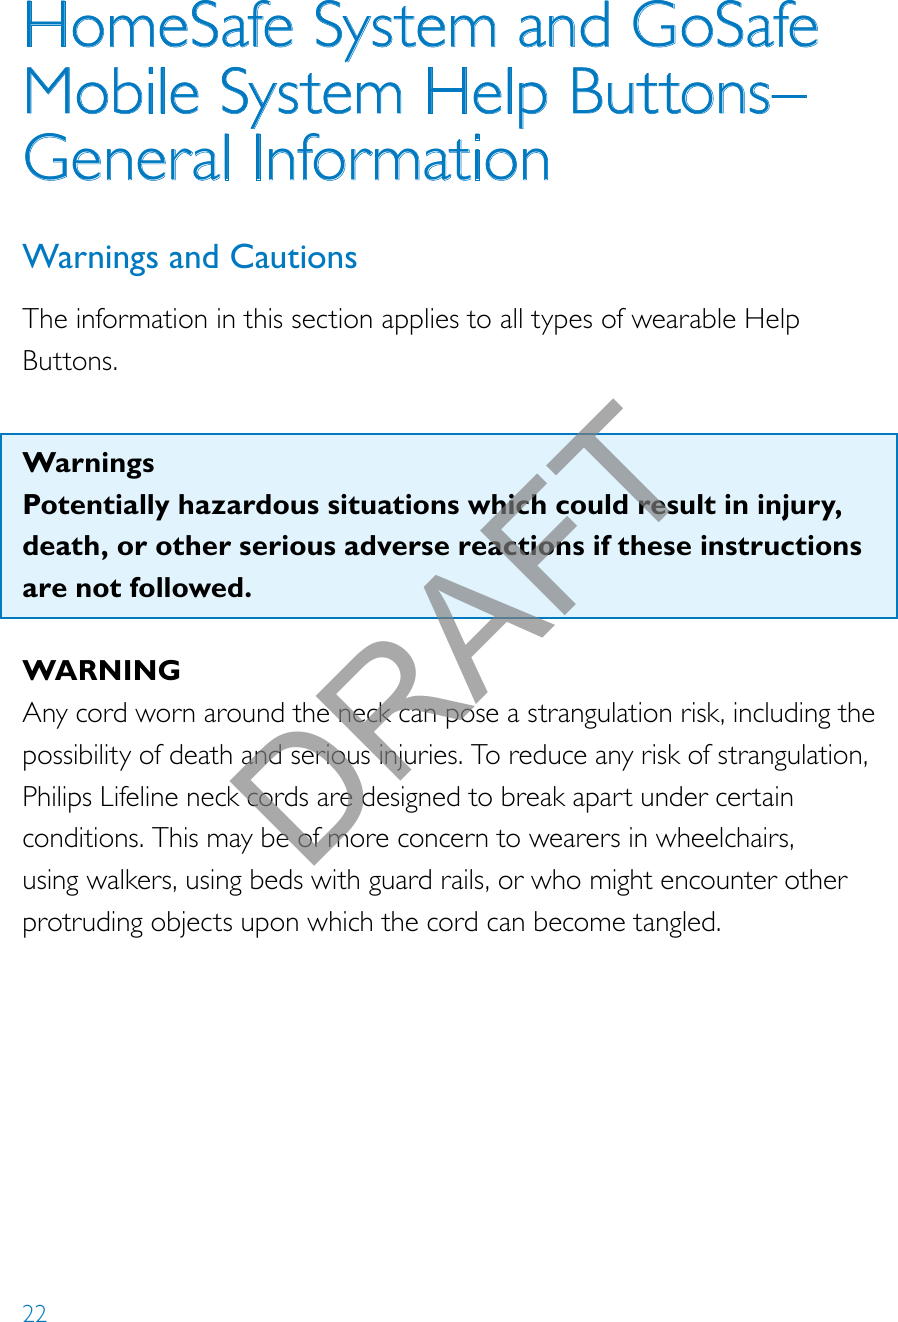 22HomeSafe System and GoSafe Mobile System Help Buttons–  General InformationWarnings and CautionsThe information in this section applies to all types of wearable Help Buttons.  WarningsPotentially hazardous situations which could result in injury, death, or other serious adverse reactions if these instructions are not followed. WARNINGAny cord worn around the neck can pose a strangulation risk, including the possibility of death and serious injuries. To reduce any risk of strangulation, Philips Lifeline neck cords are designed to break apart under certain conditions. This may be of more concern to wearers in wheelchairs, using walkers, using beds with guard rails, or who might encounter other protruding objects upon which the cord can become tangled. DRAFT